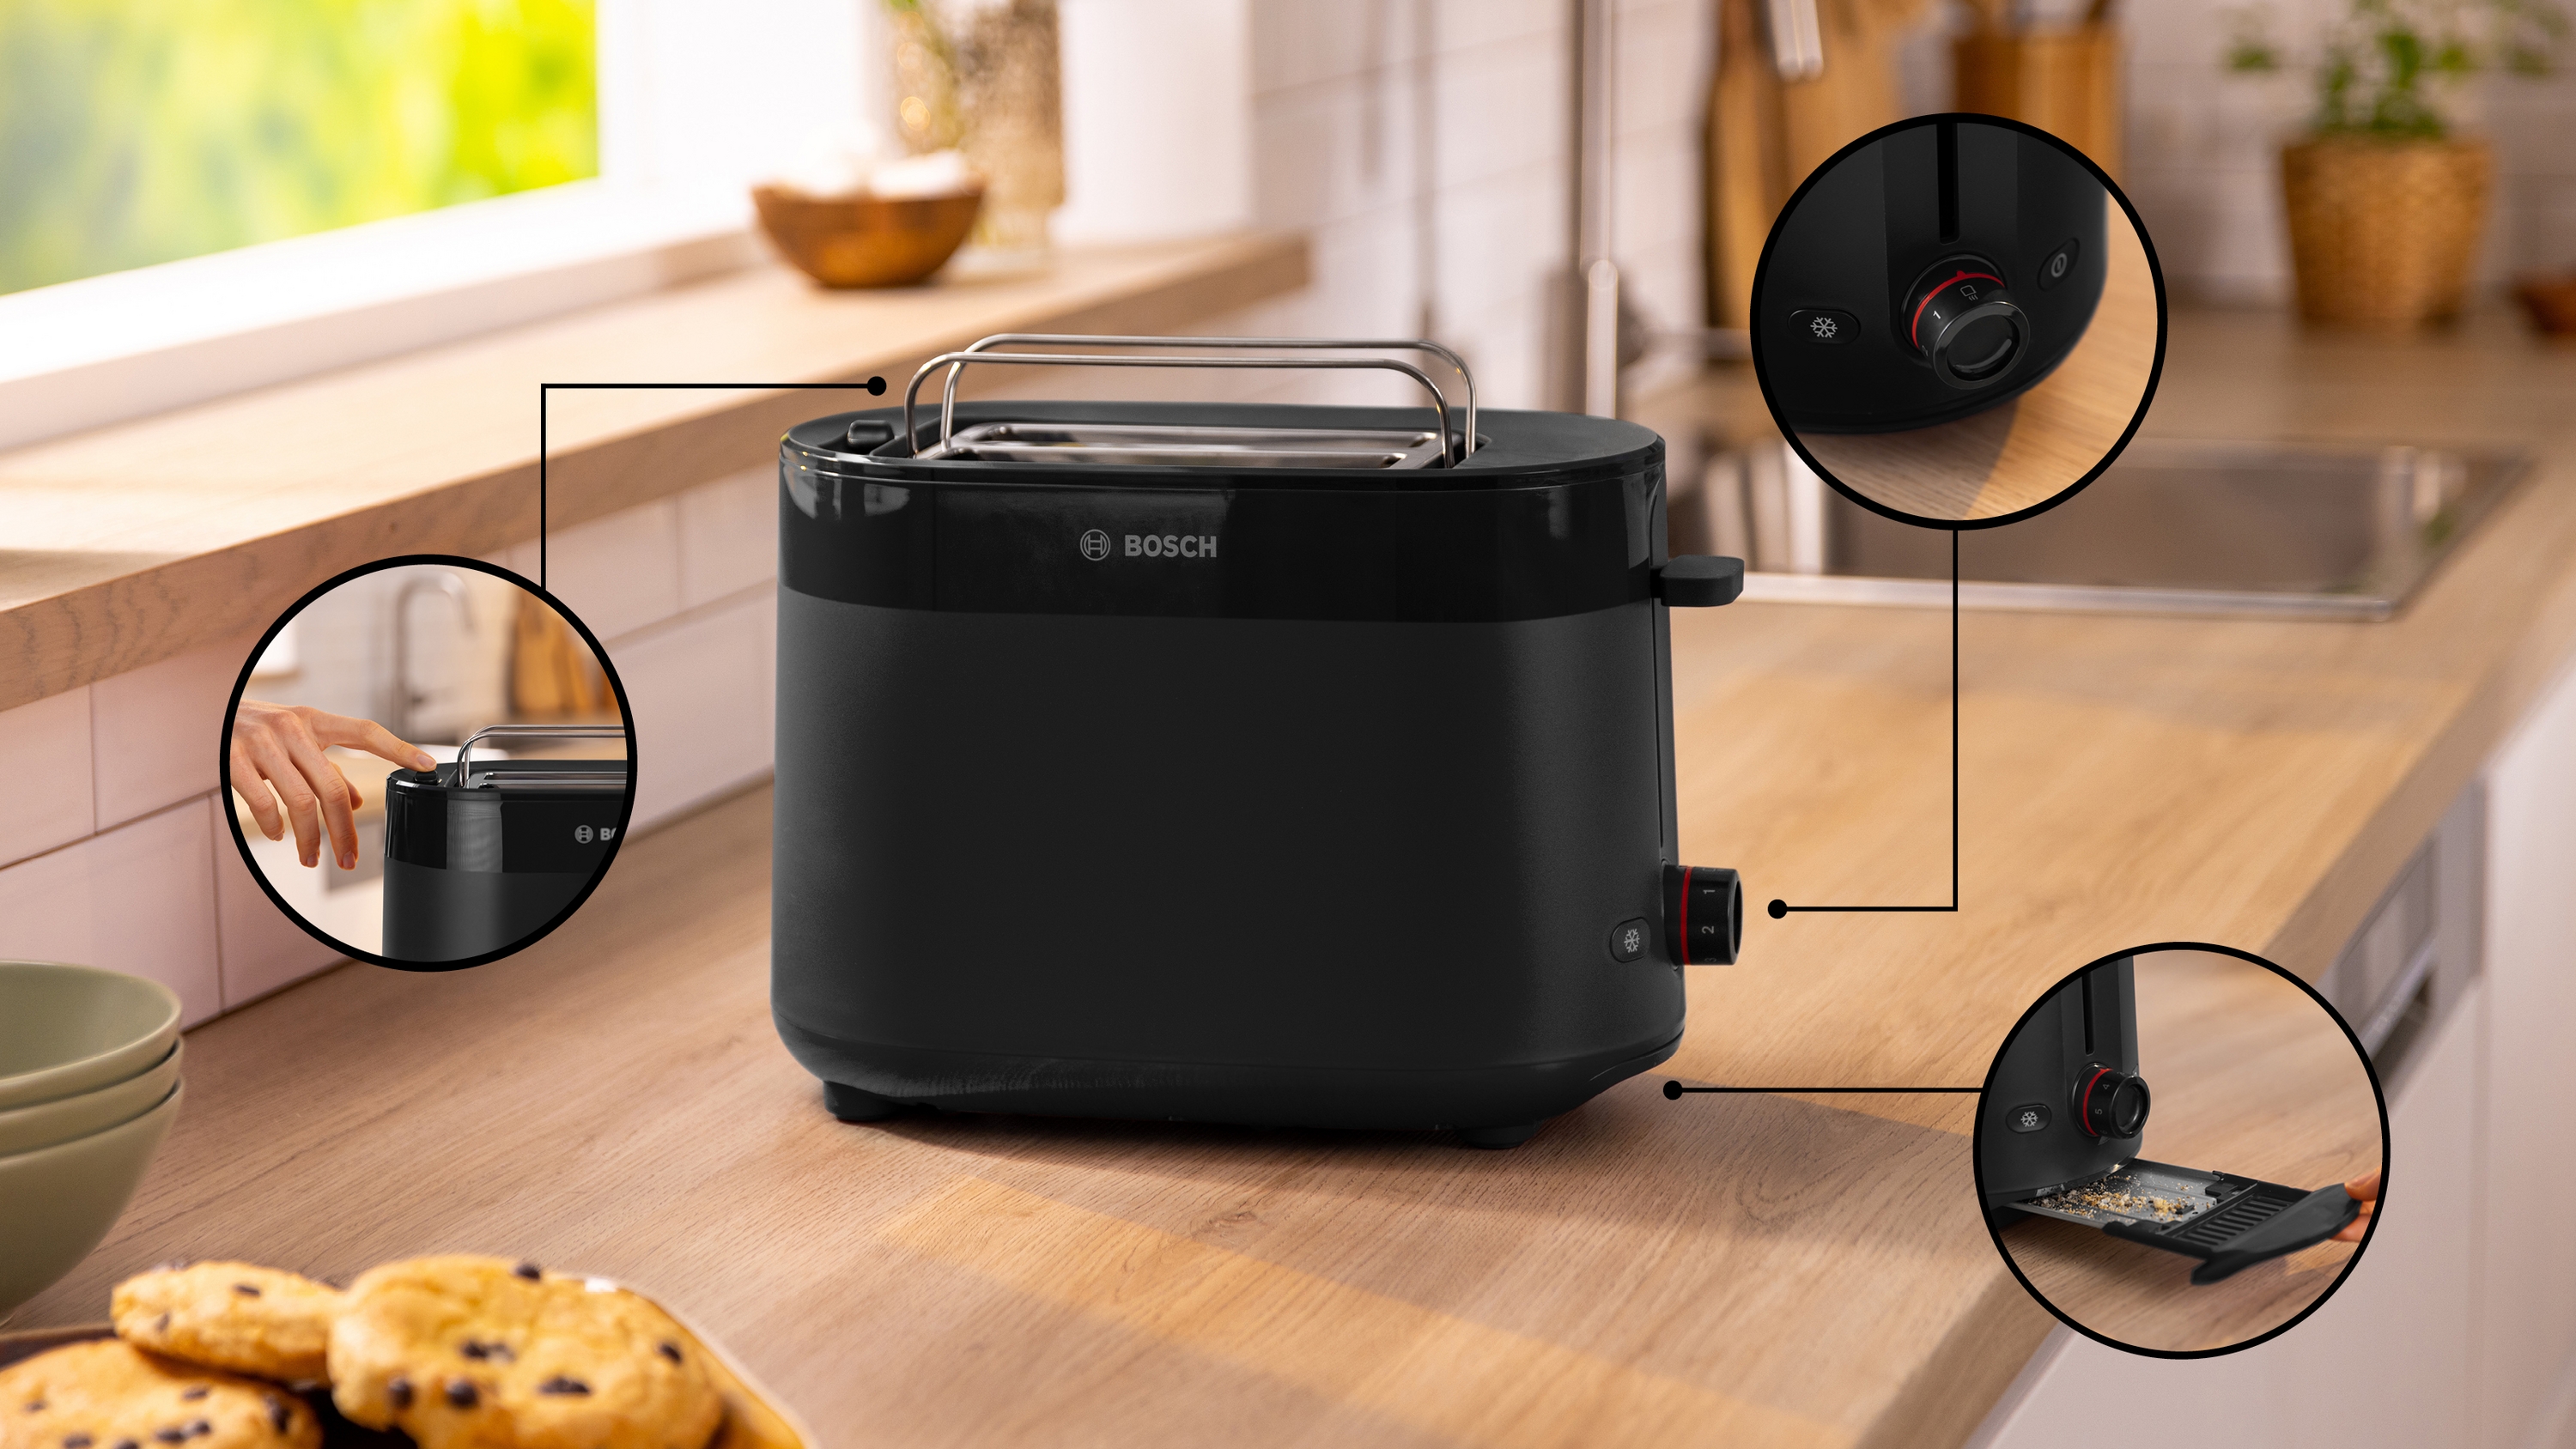 Compact toaster, MyMoment, Black, TAT2M123